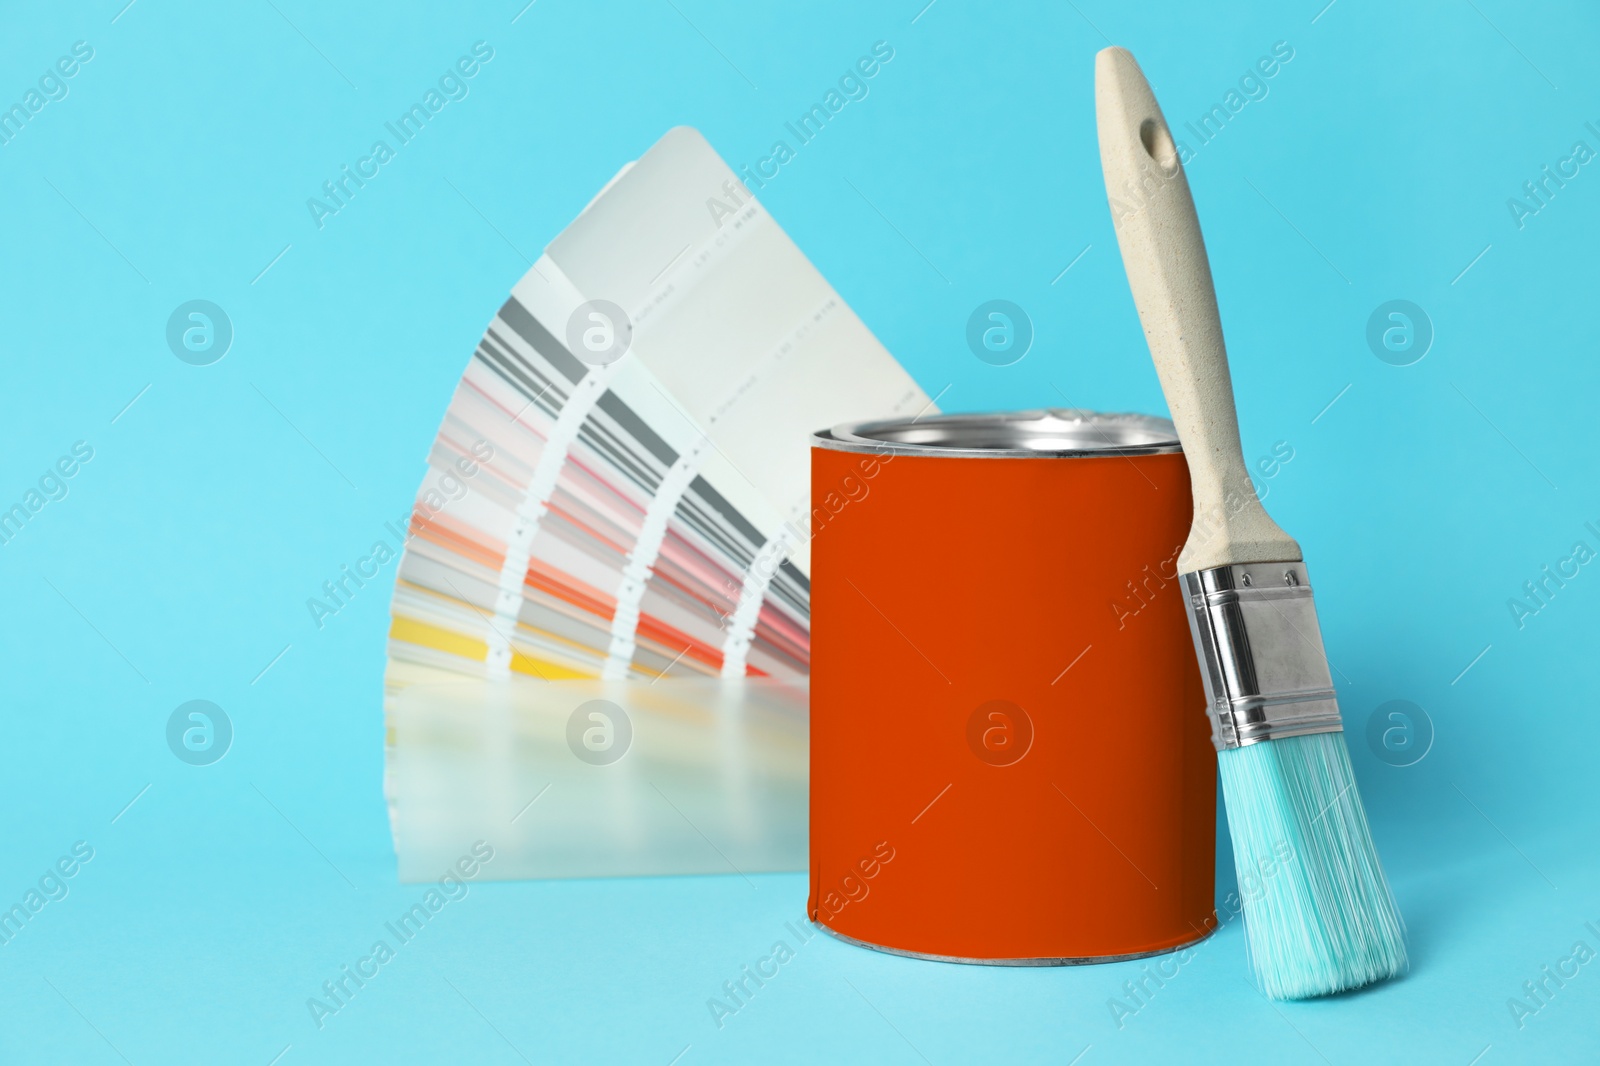 Photo of Can of orange paint, color palette samples and brush on turquoise background